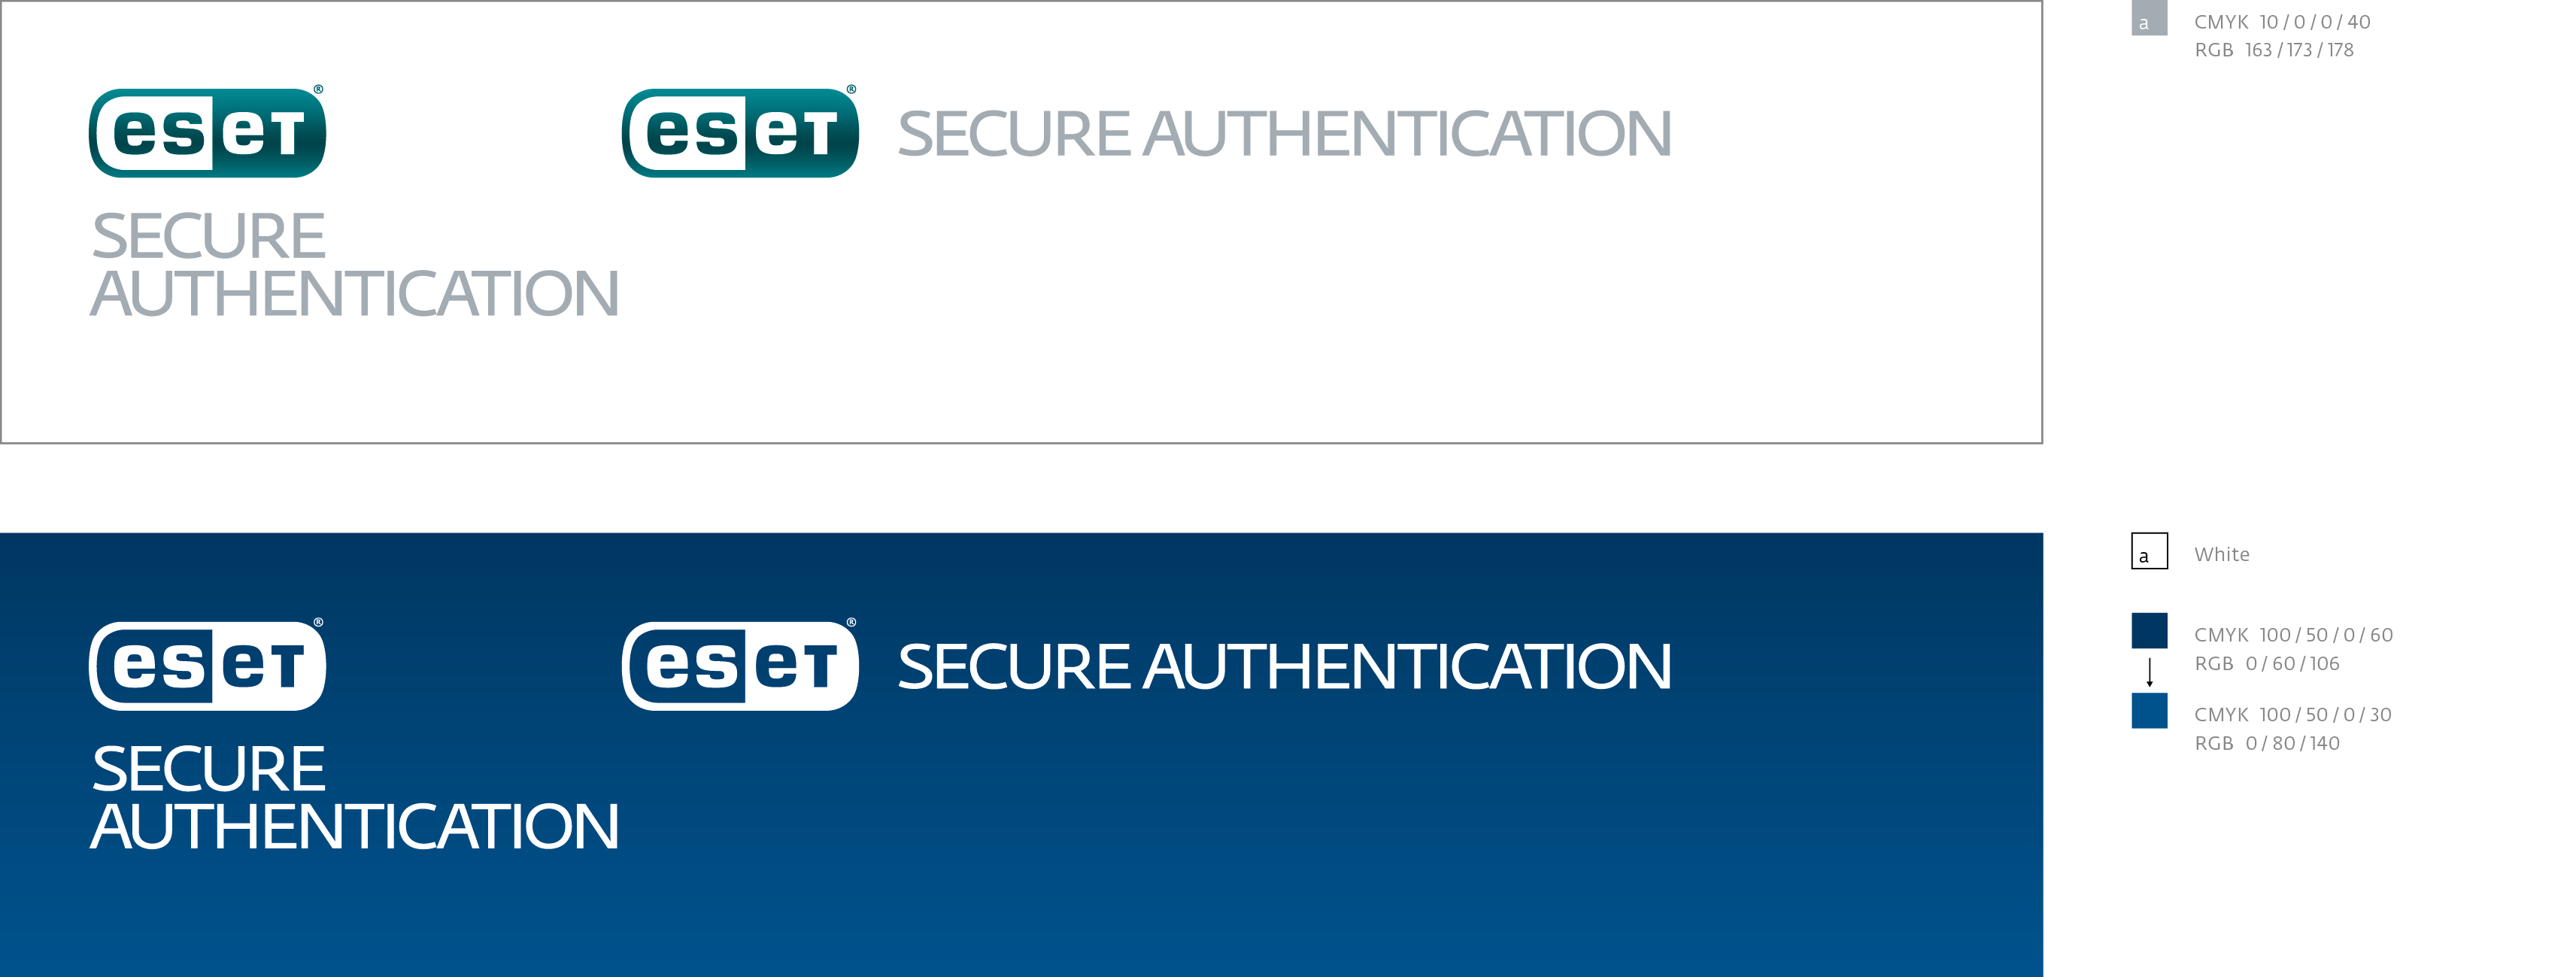 logotype---eset-secure-authentication.png